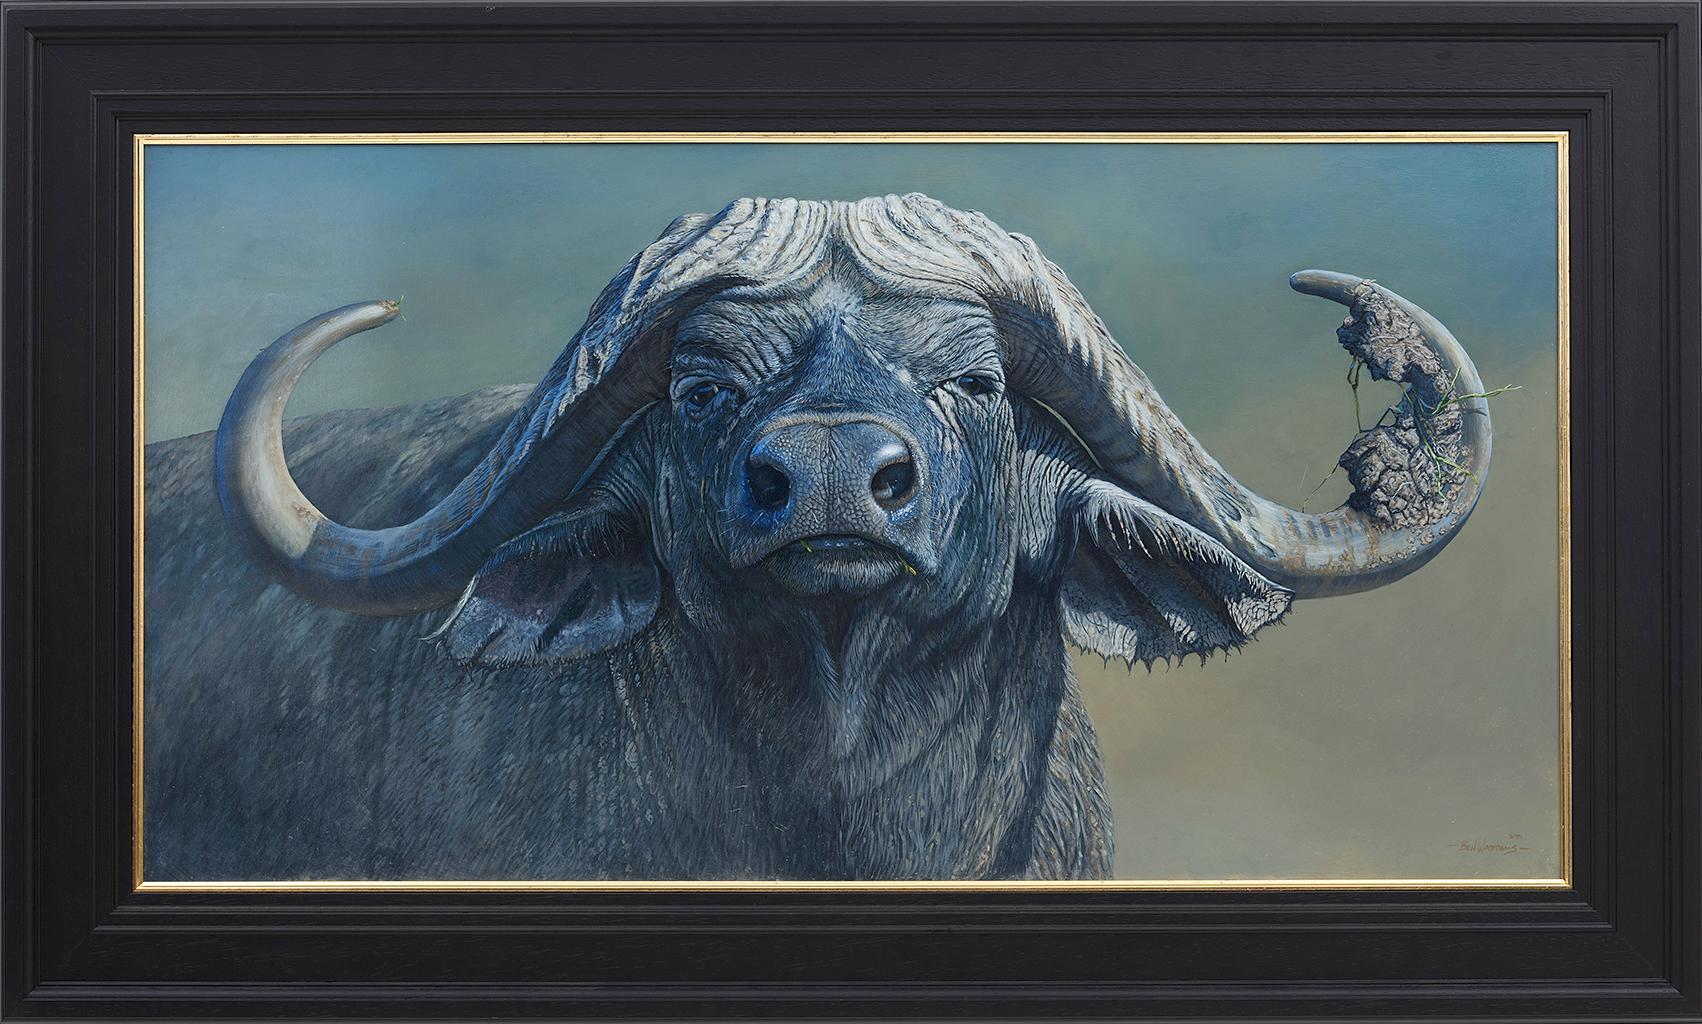 Ben Waddams Animal Painting - 'Warrior' Photorealist painting of a Water Buffalo in the wild, wildlife, grey